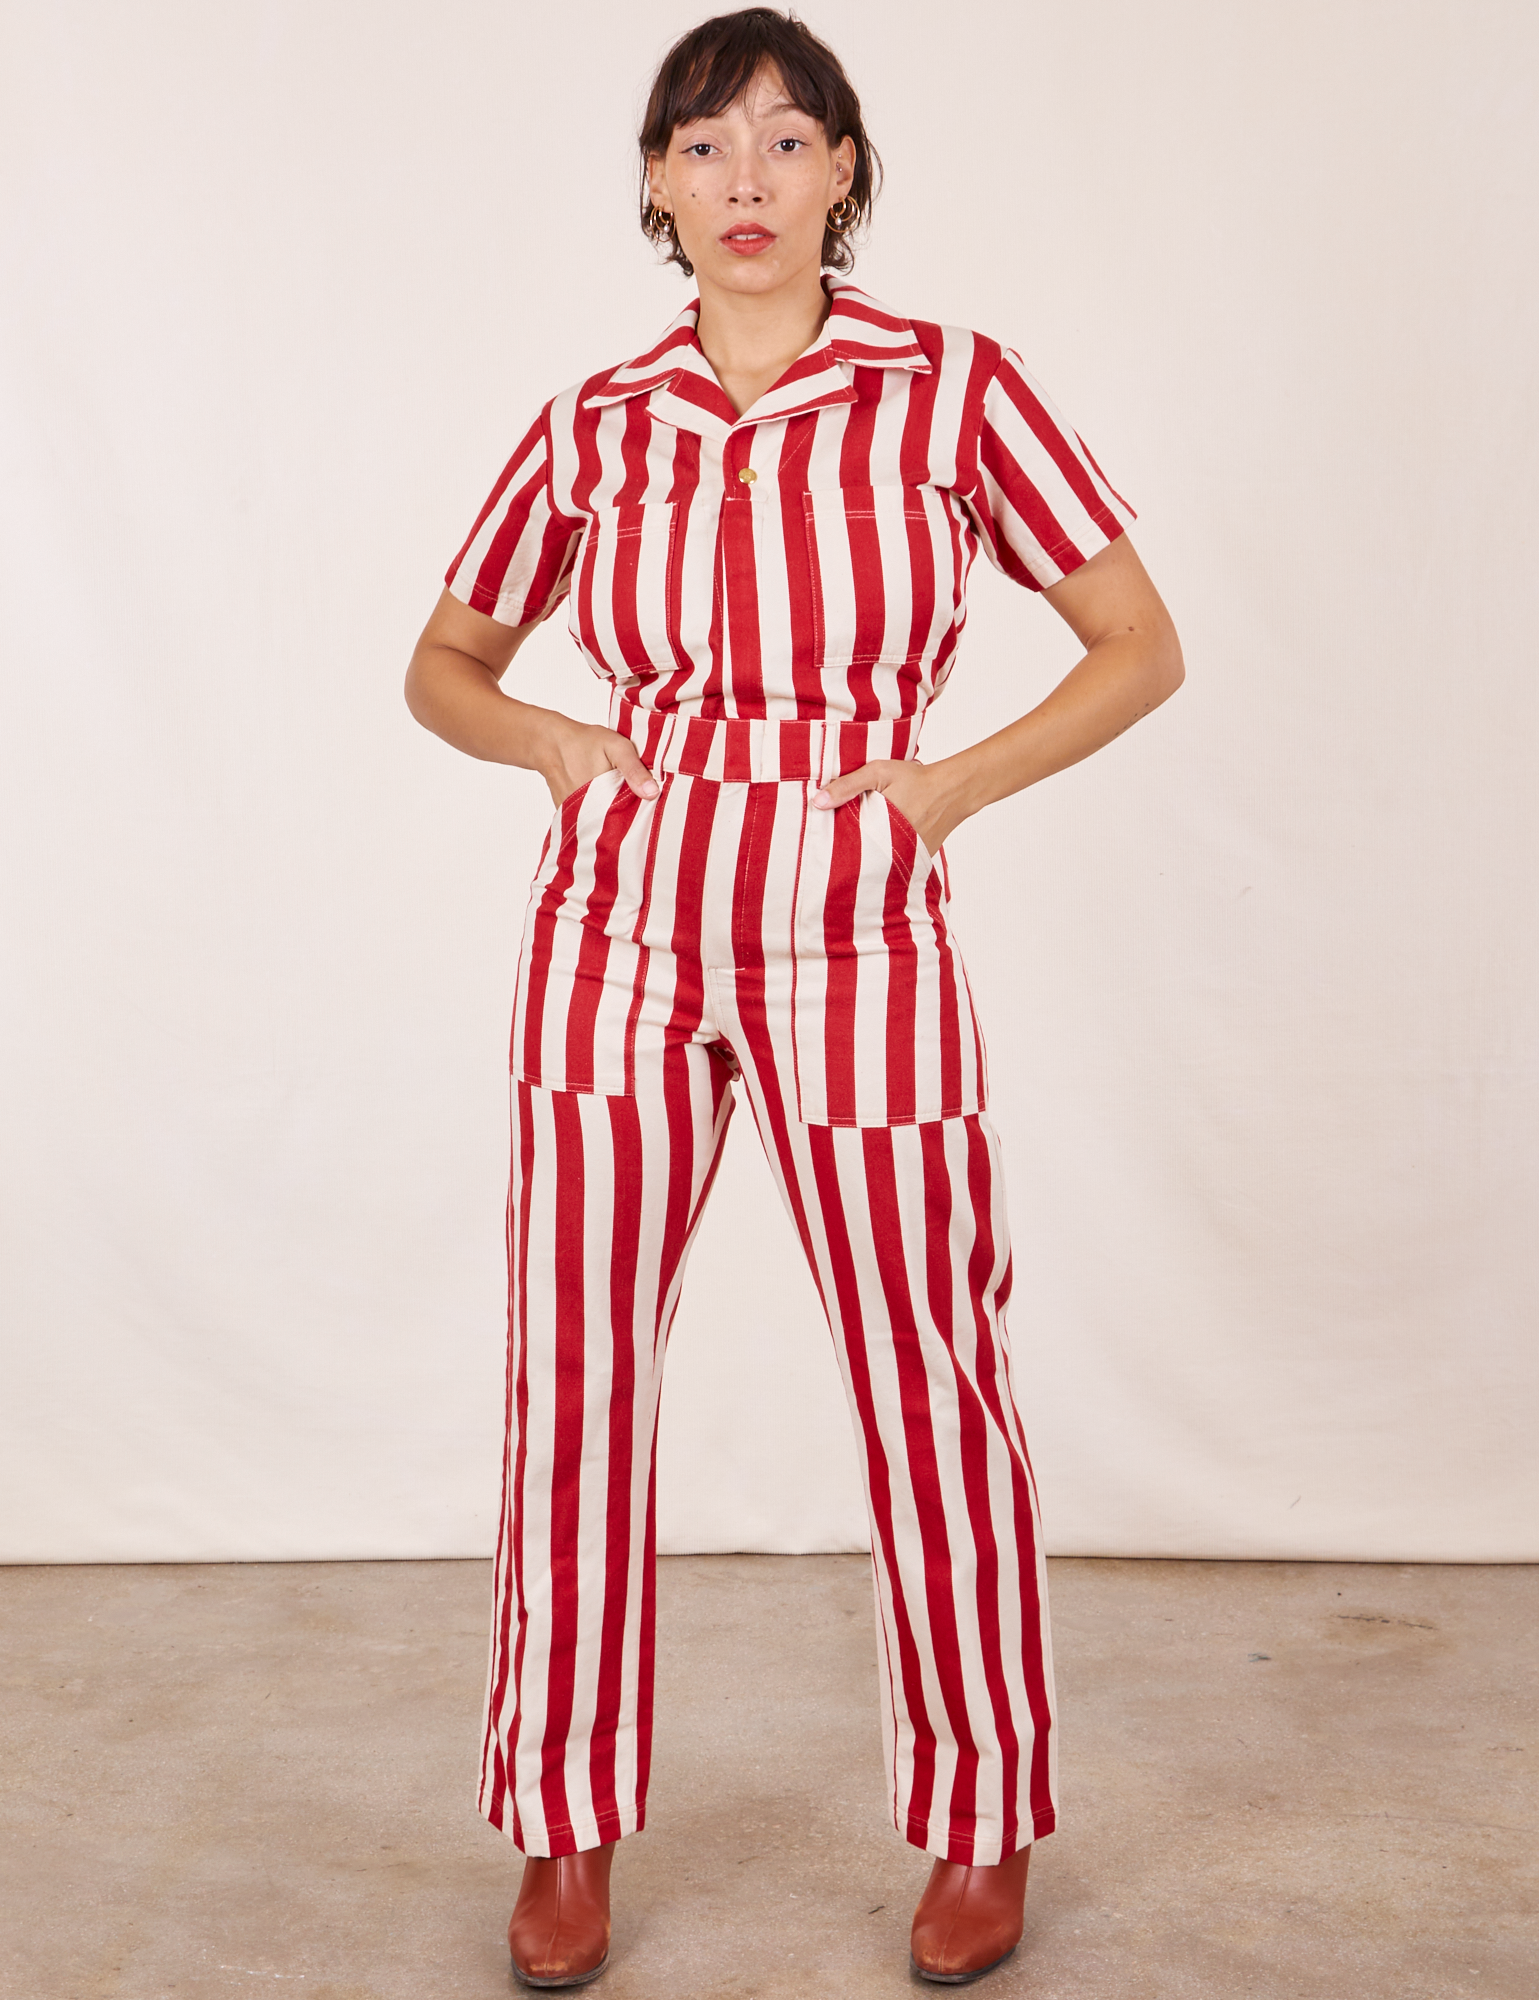 Tiara is 5&#39;4&quot; and wearing XS Cherry Stripe Jumpsuit